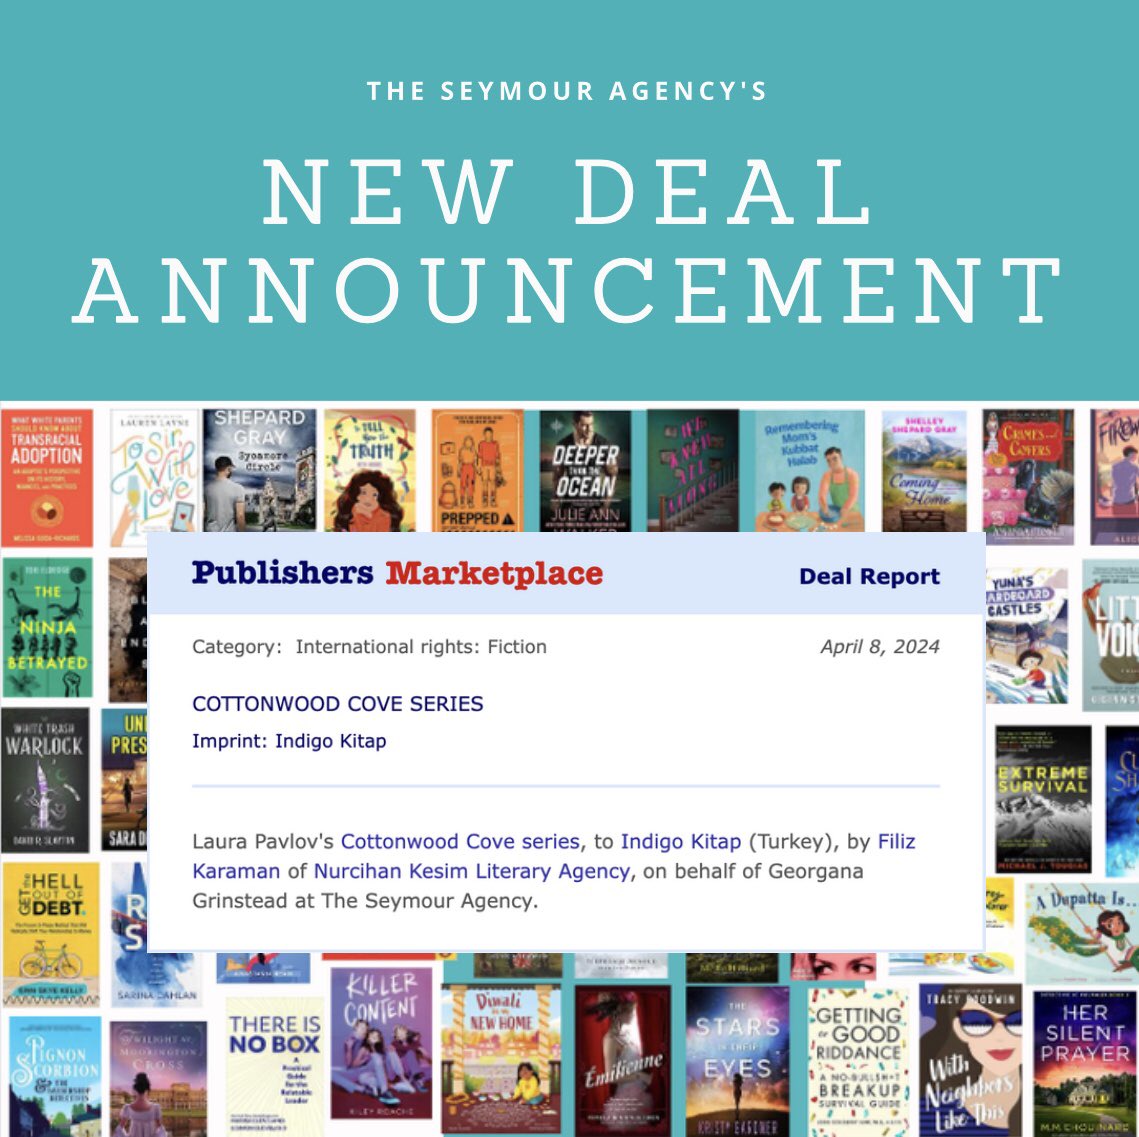 🌟New Deal Announcement🌟 Huge congrats to author Laura Pavlov and agent Georgana Grinstead on this new international rights deal!!